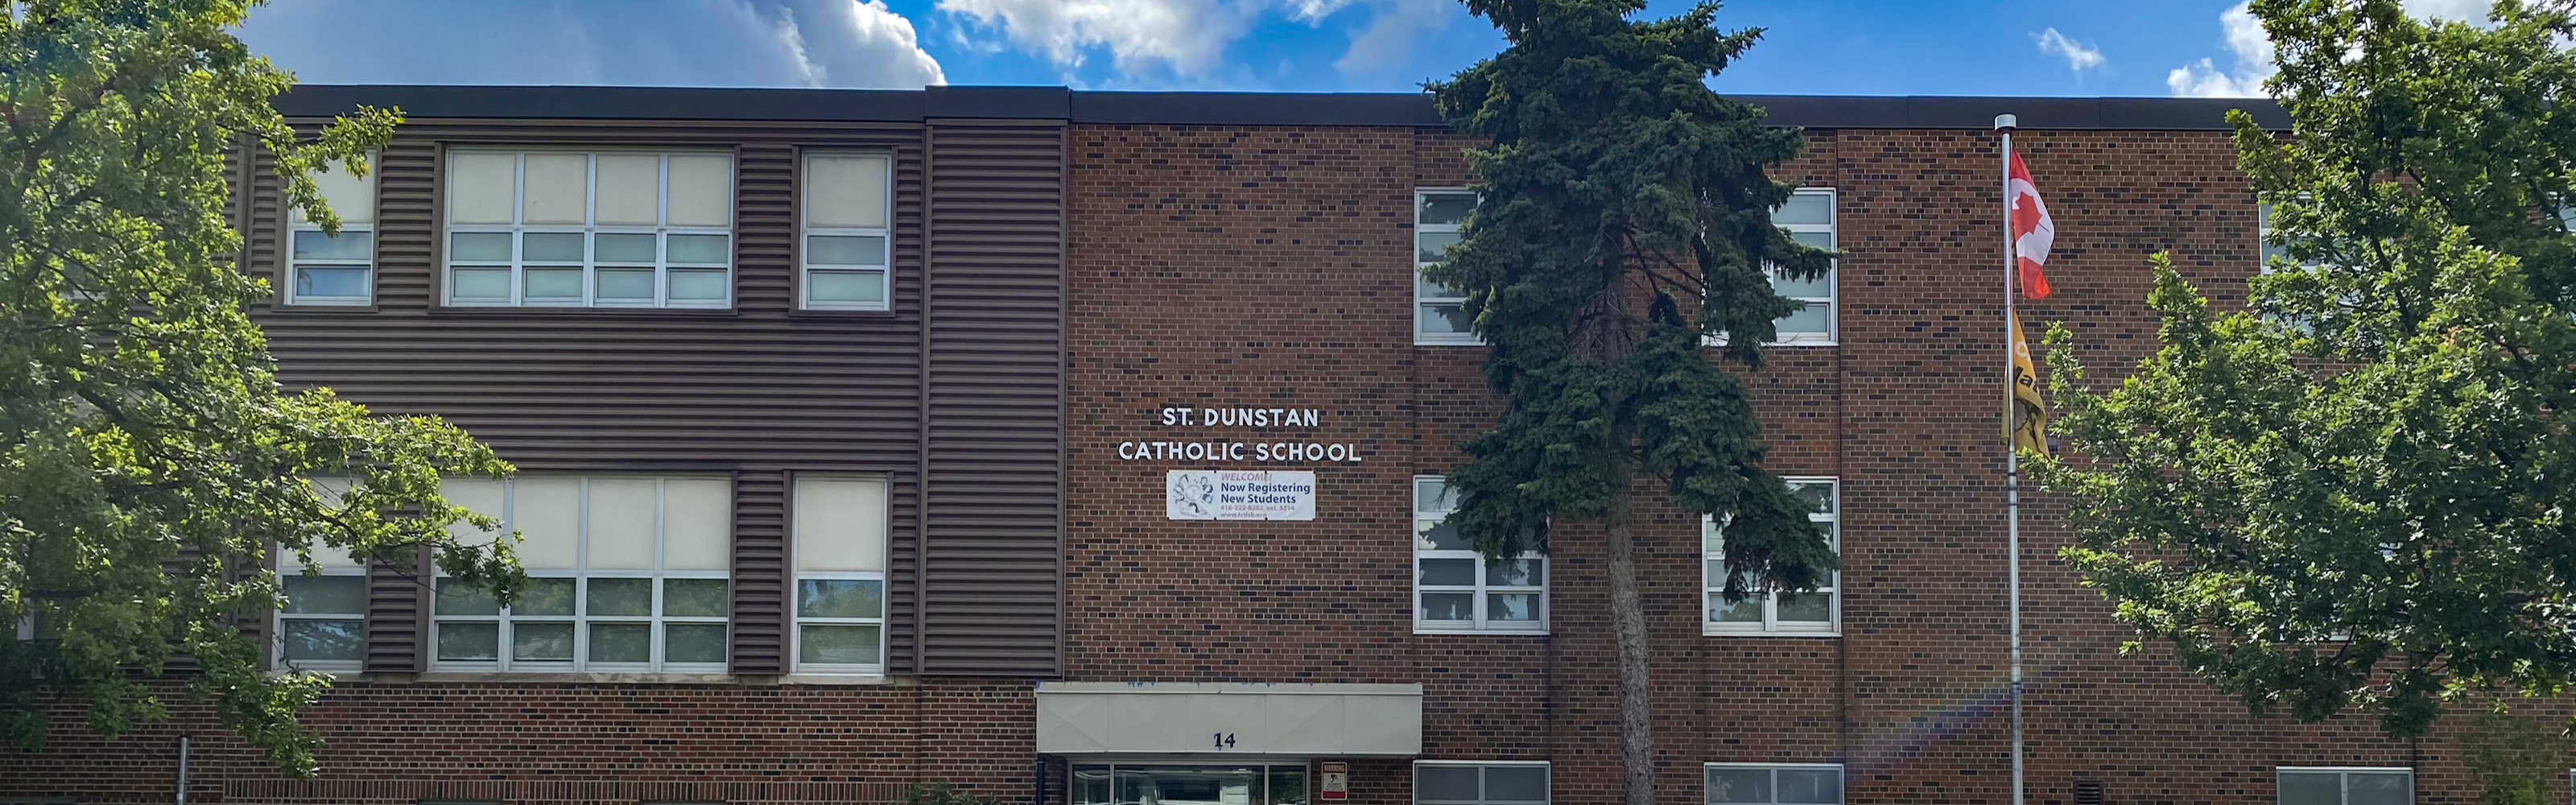 The front of the St. Dunstan Catholic School building.